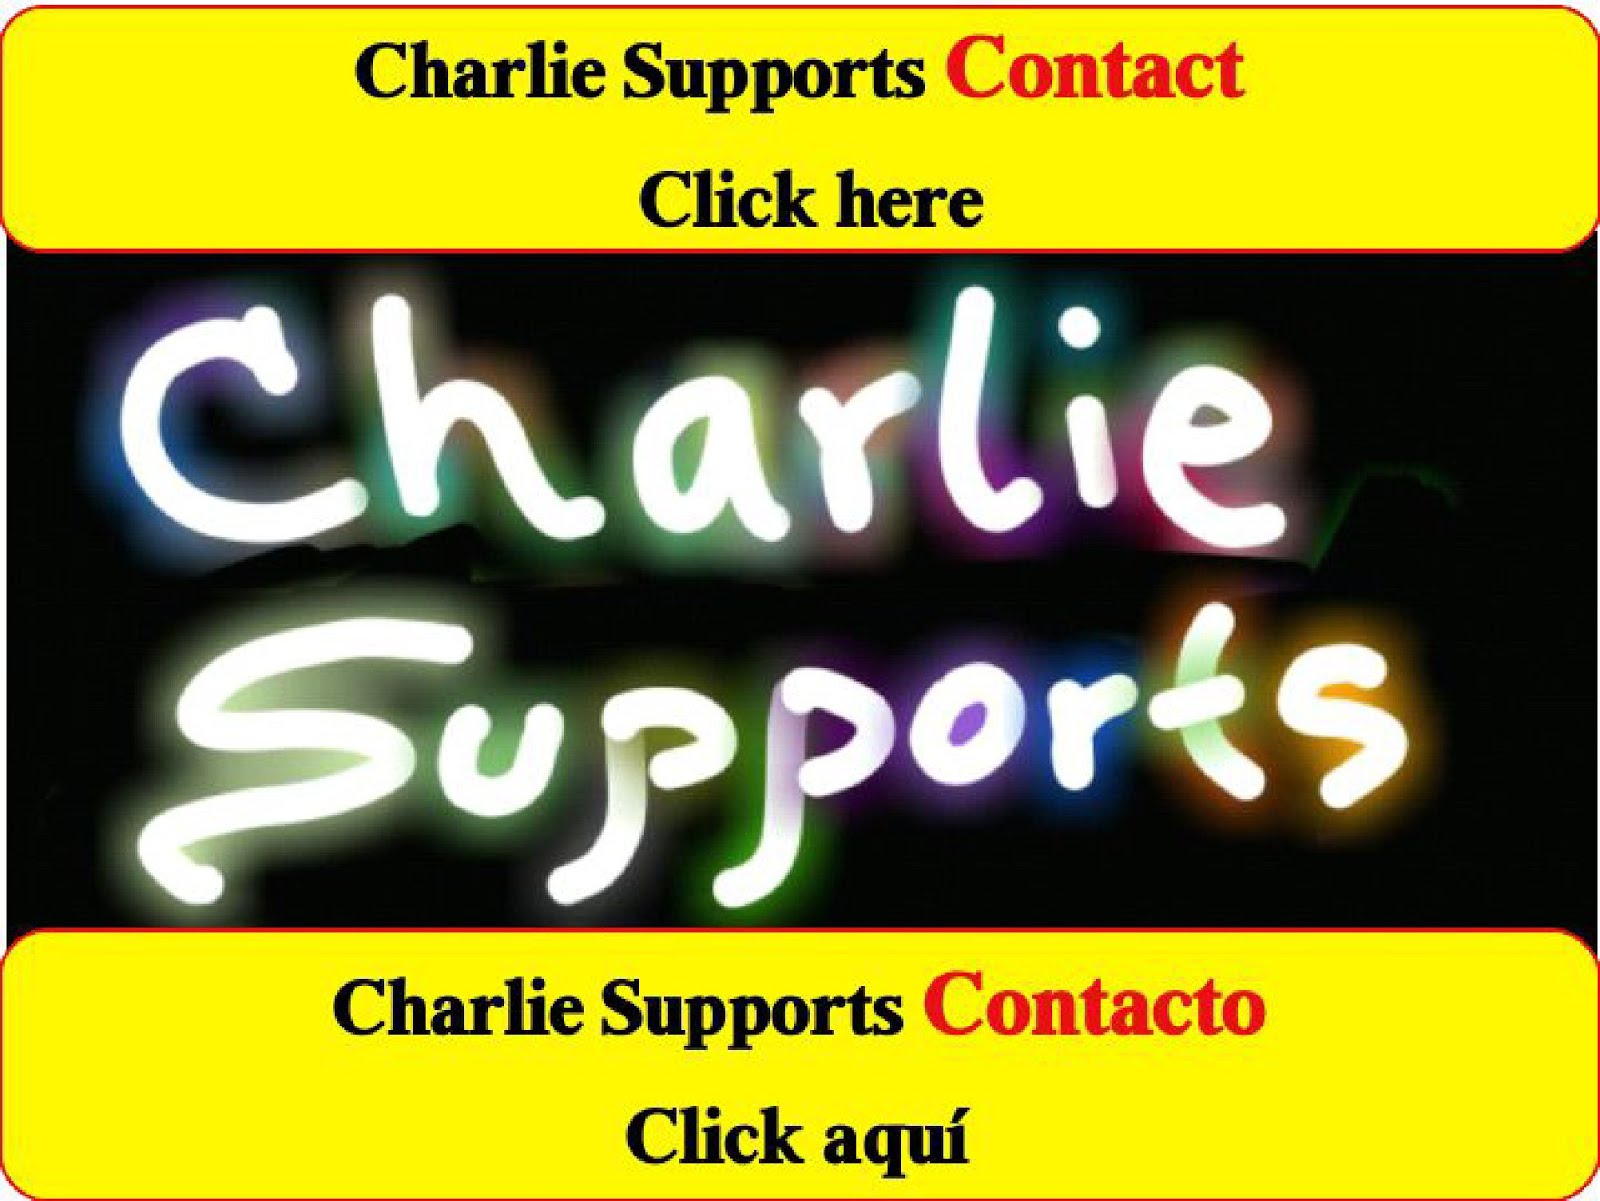 Charlie Supports Contact here: charlieglobalmail@gmail.com